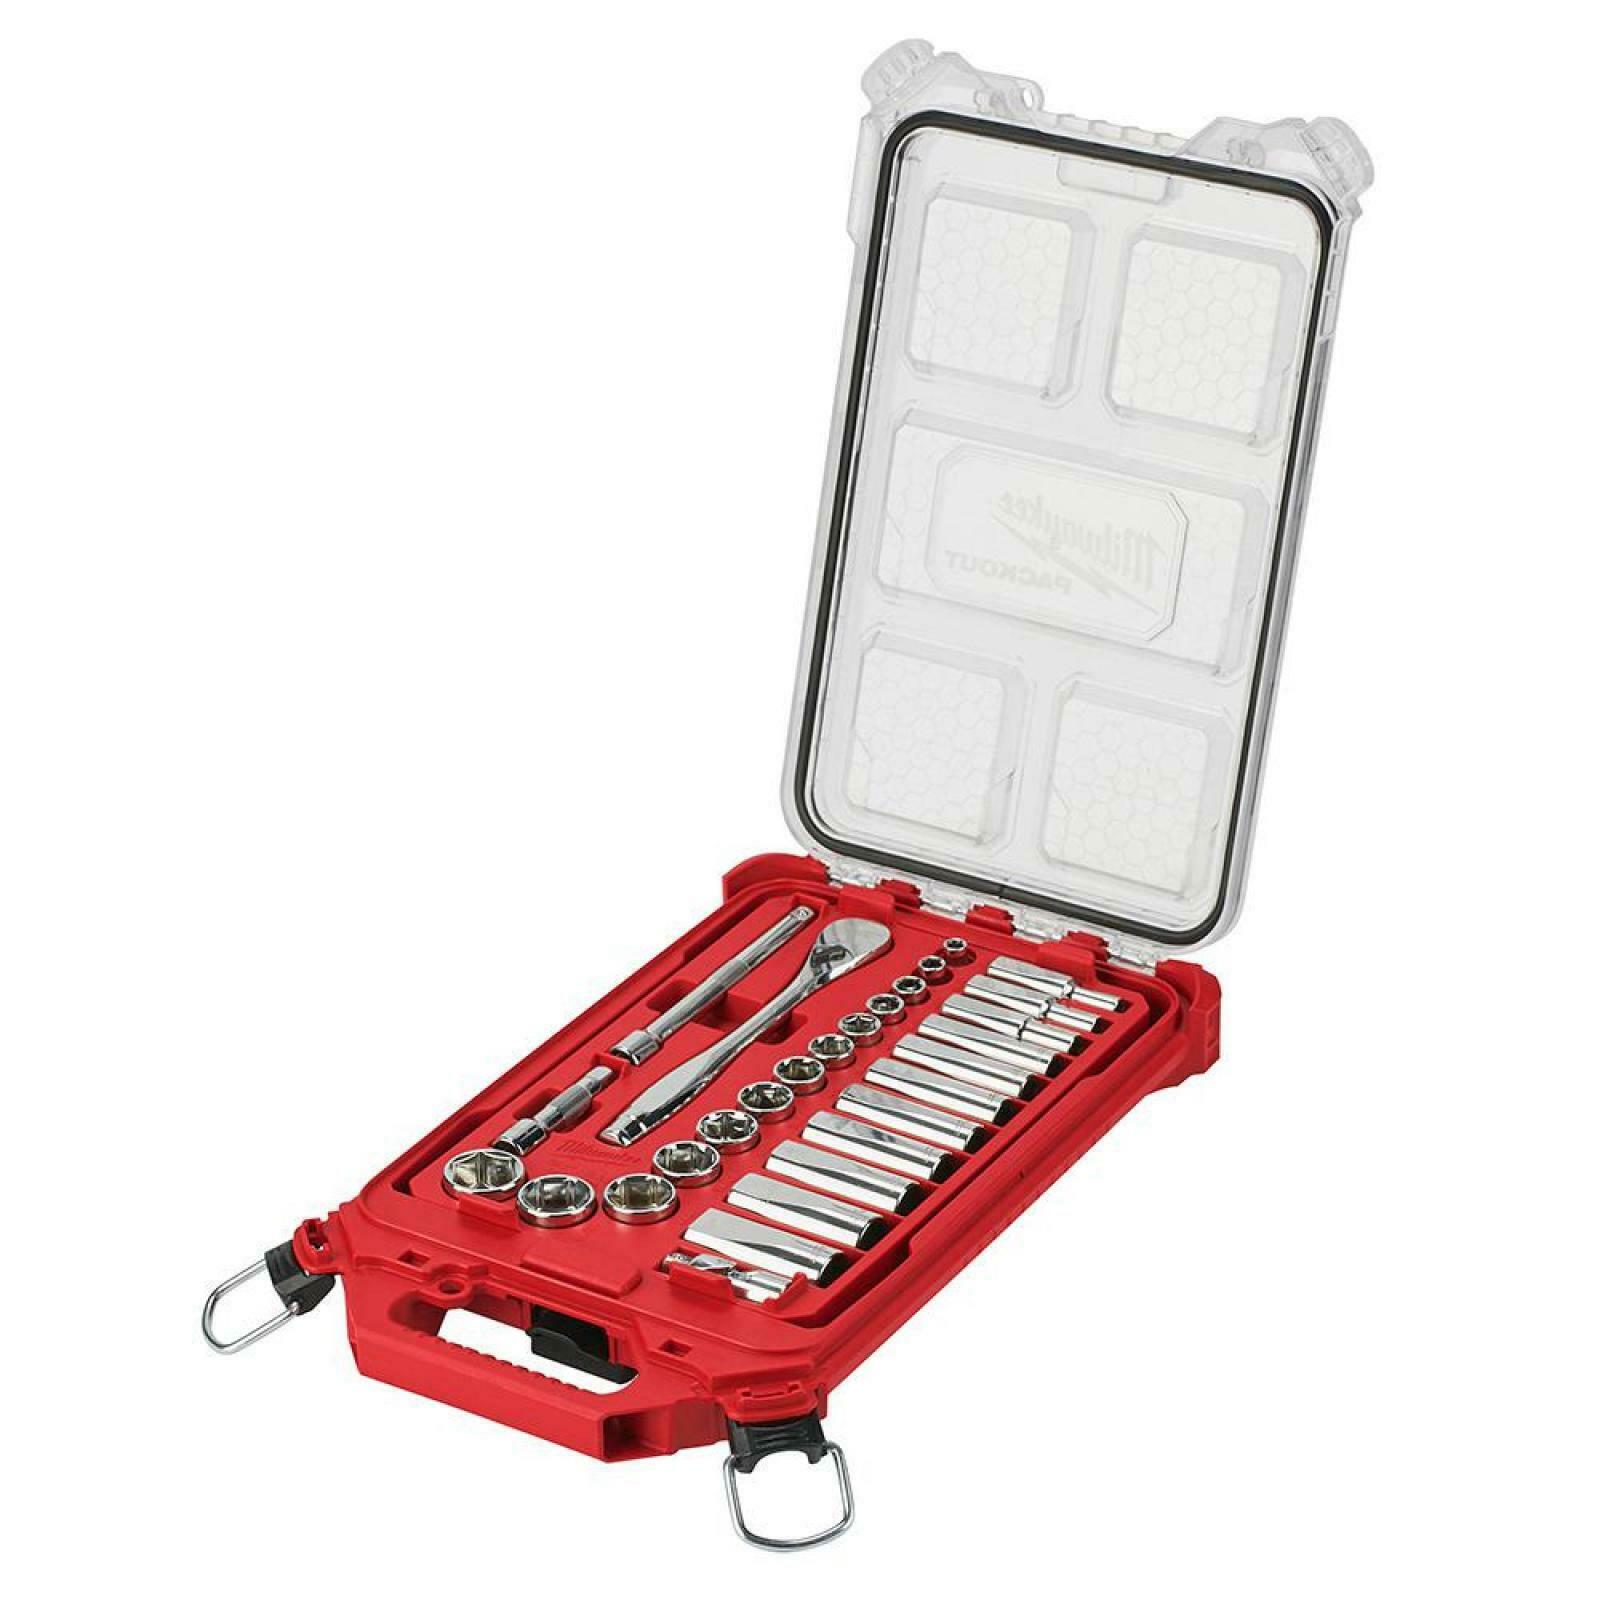 48-22-9481 SAE Ratchet and Socket Set, Alloy Steel, Chrome, Specifications: 3/8 in Drive